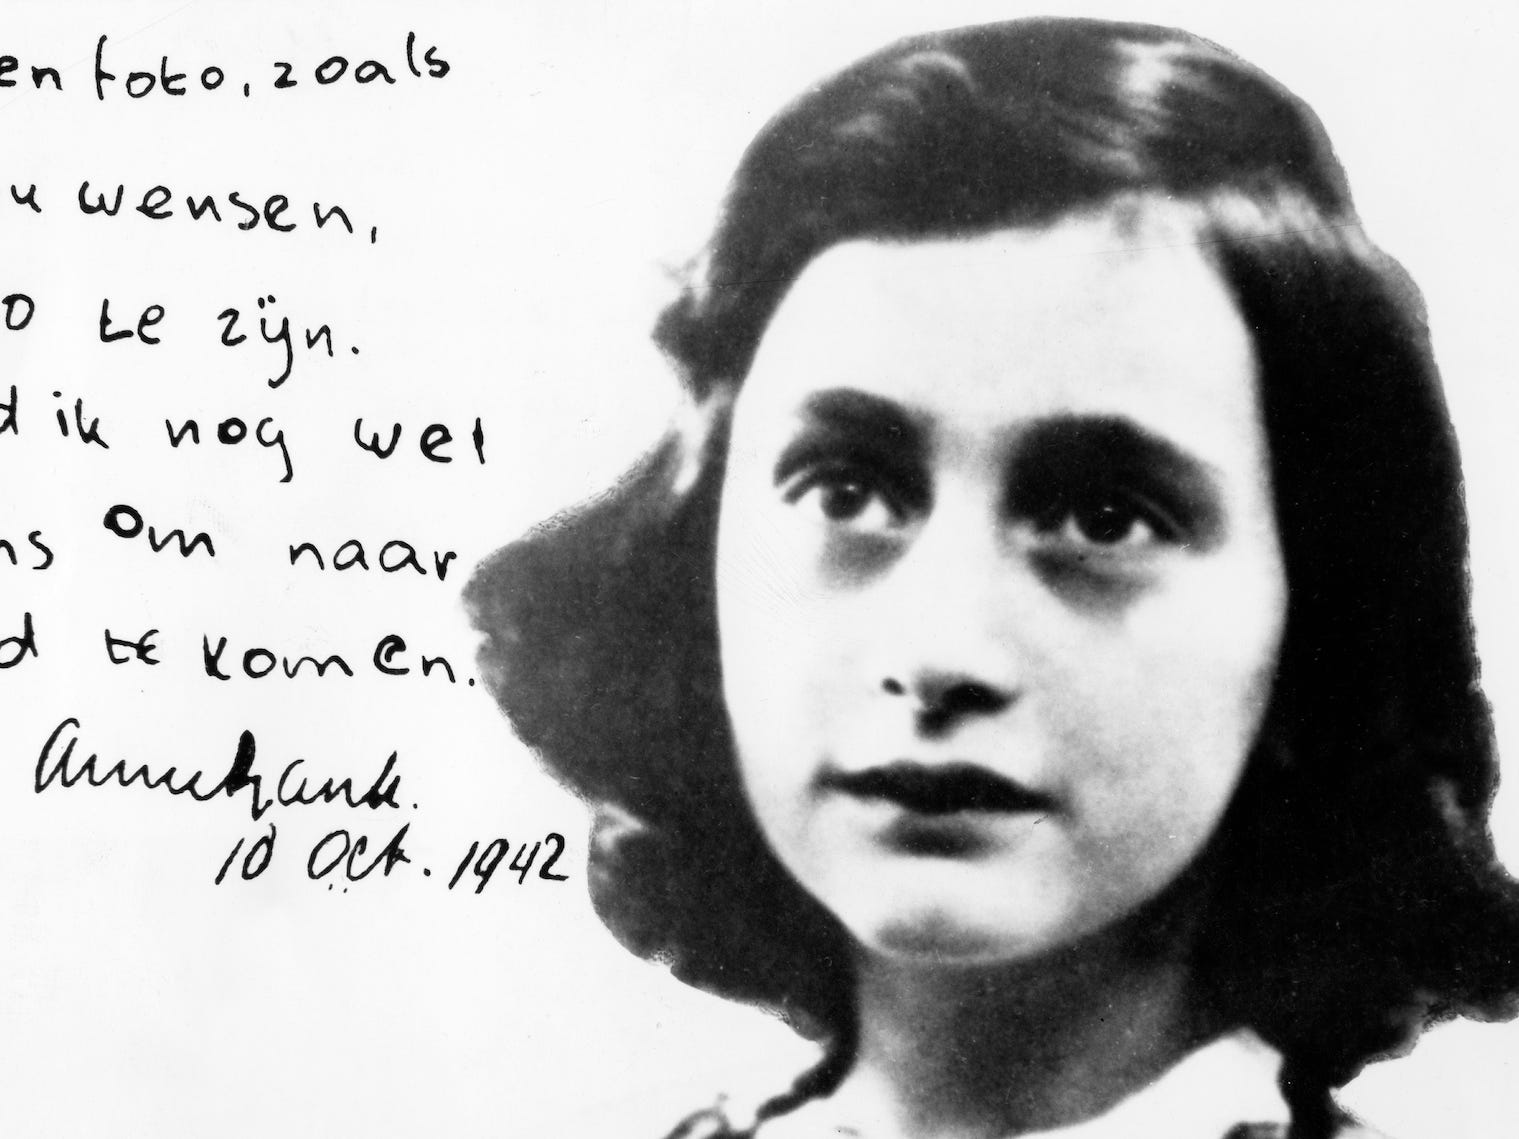 Anne Frank, German Jew who emigrated with her family to the Netherlands during the Nazi period.